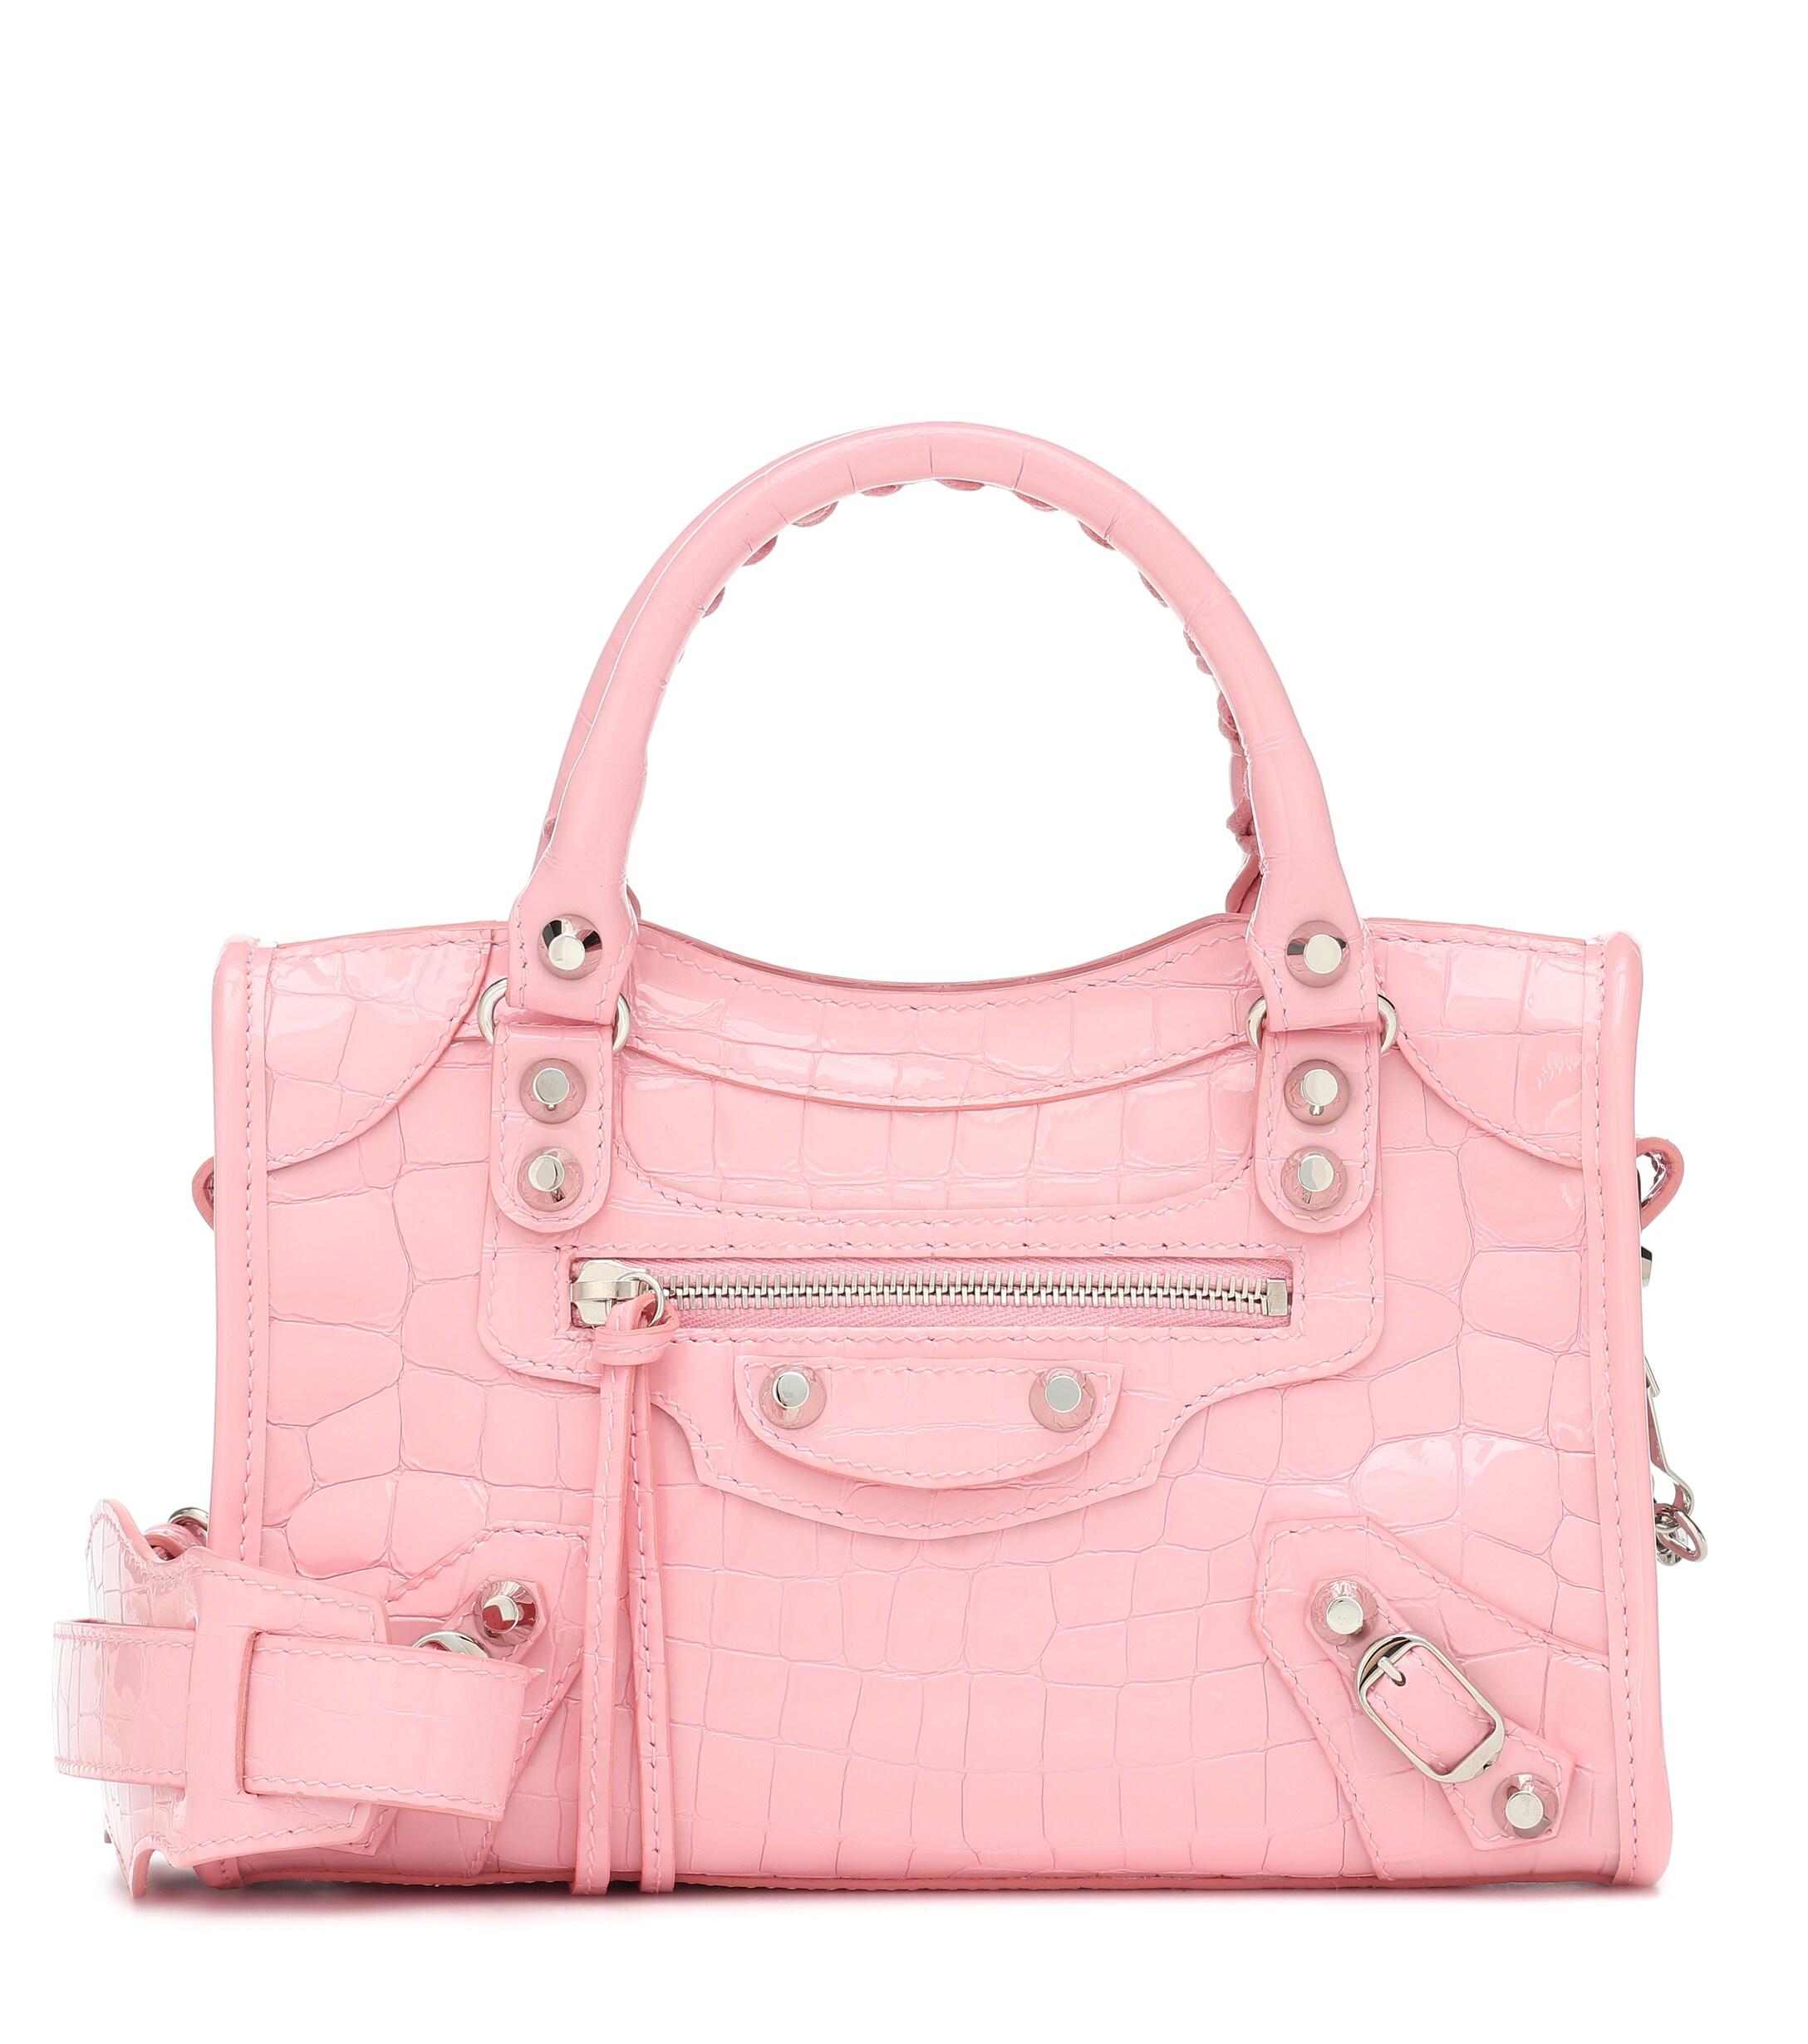 Balenciaga Leather Classic City Croc-effect Shoulder Bag in Pink - Lyst